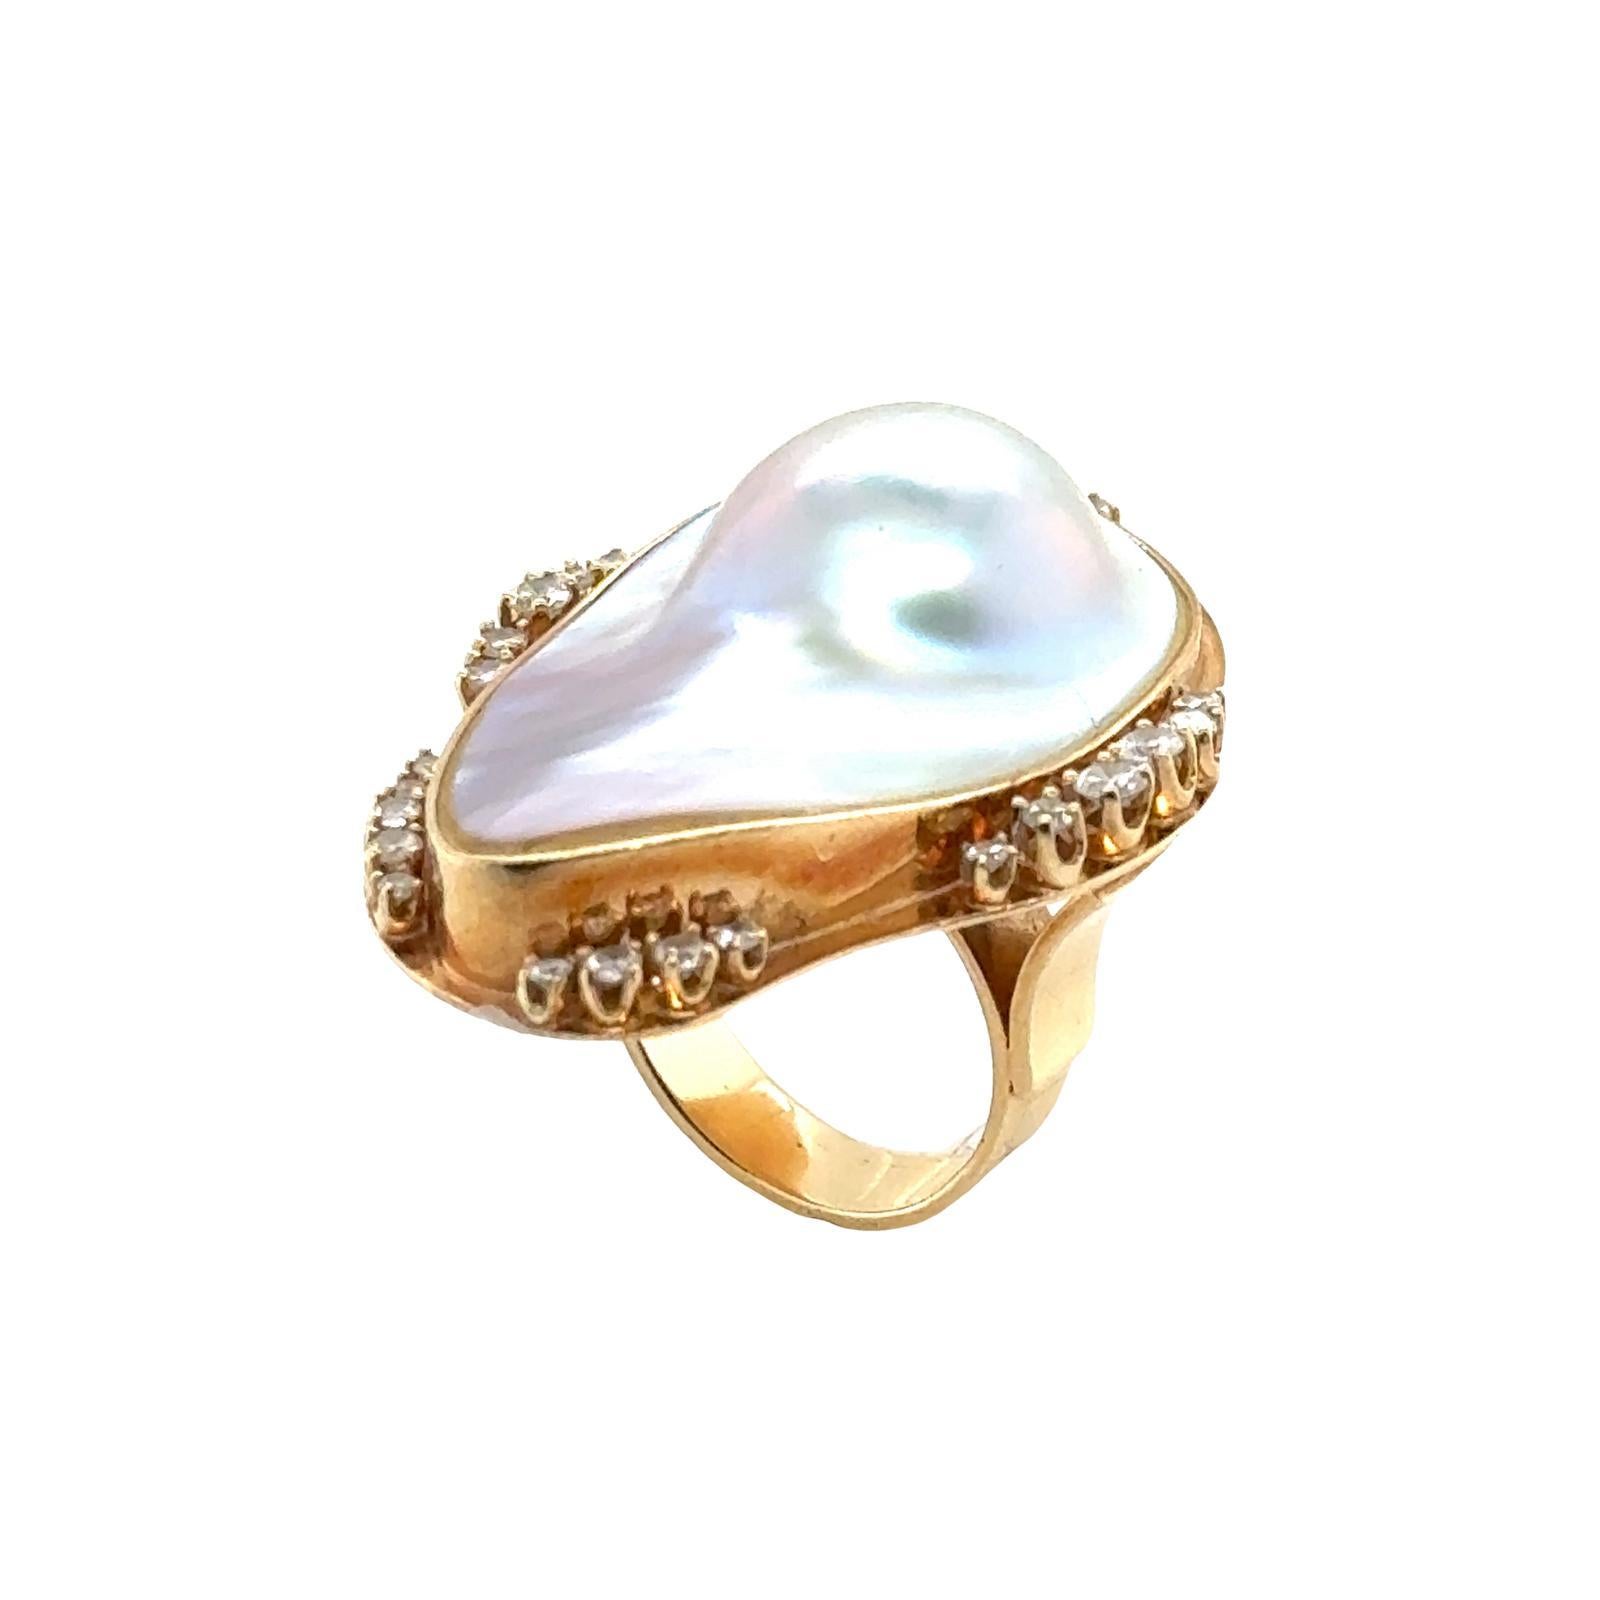 Blister Pearl Diamond 14 Karat Yellow Gold Elongated Cocktail Ring In Excellent Condition For Sale In Boca Raton, FL